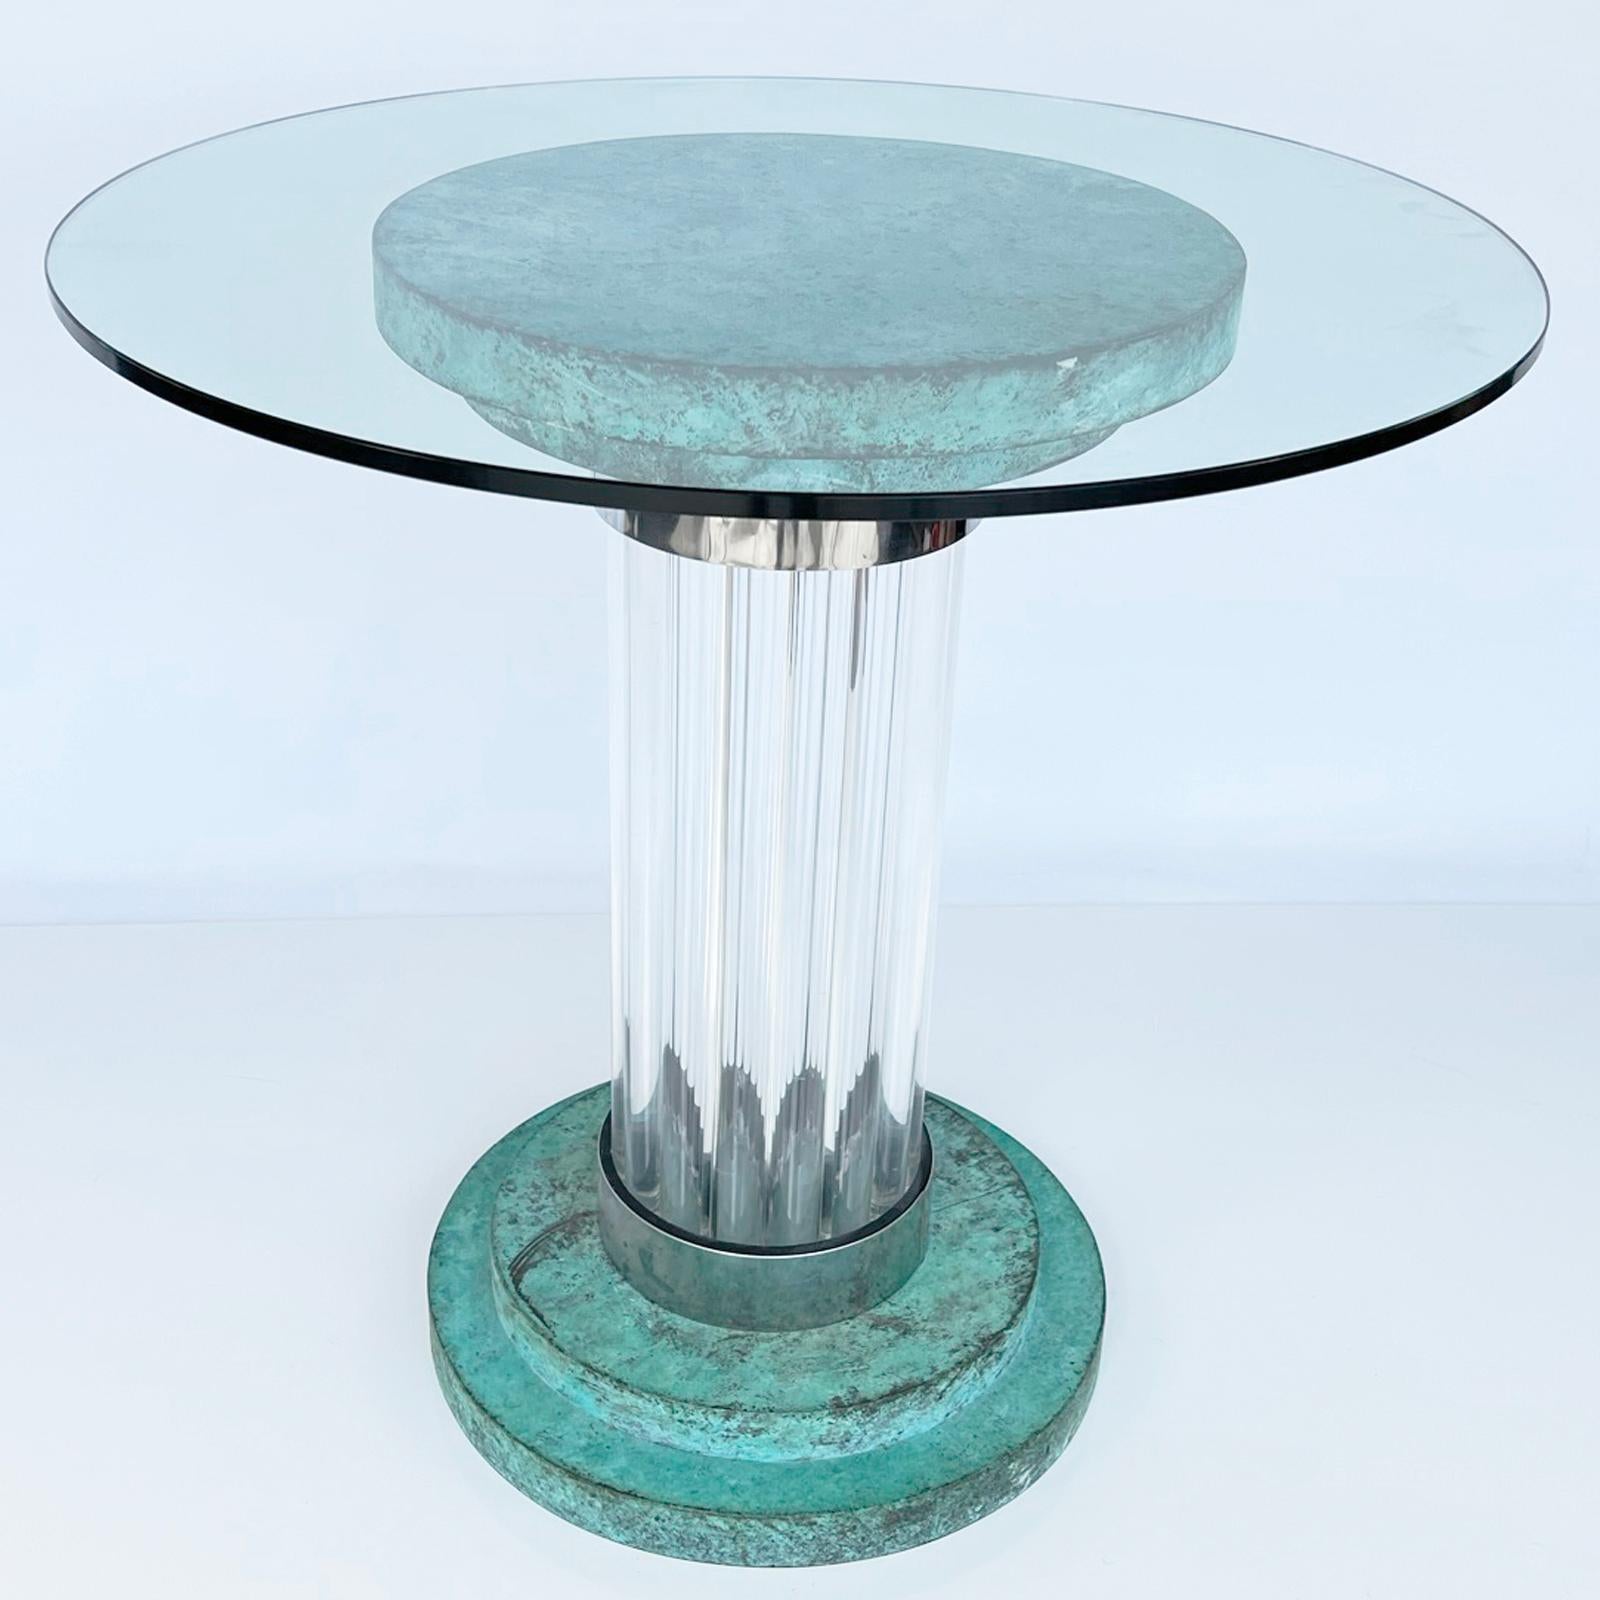 Pedestal table base, by Romeo Rega, having a round top of glass, on its base of graduated disks of copper with verdigris finish, raised on a column of Lucite rods with chromed-metal banding, on matching stepped plinth base. 

The table can be used